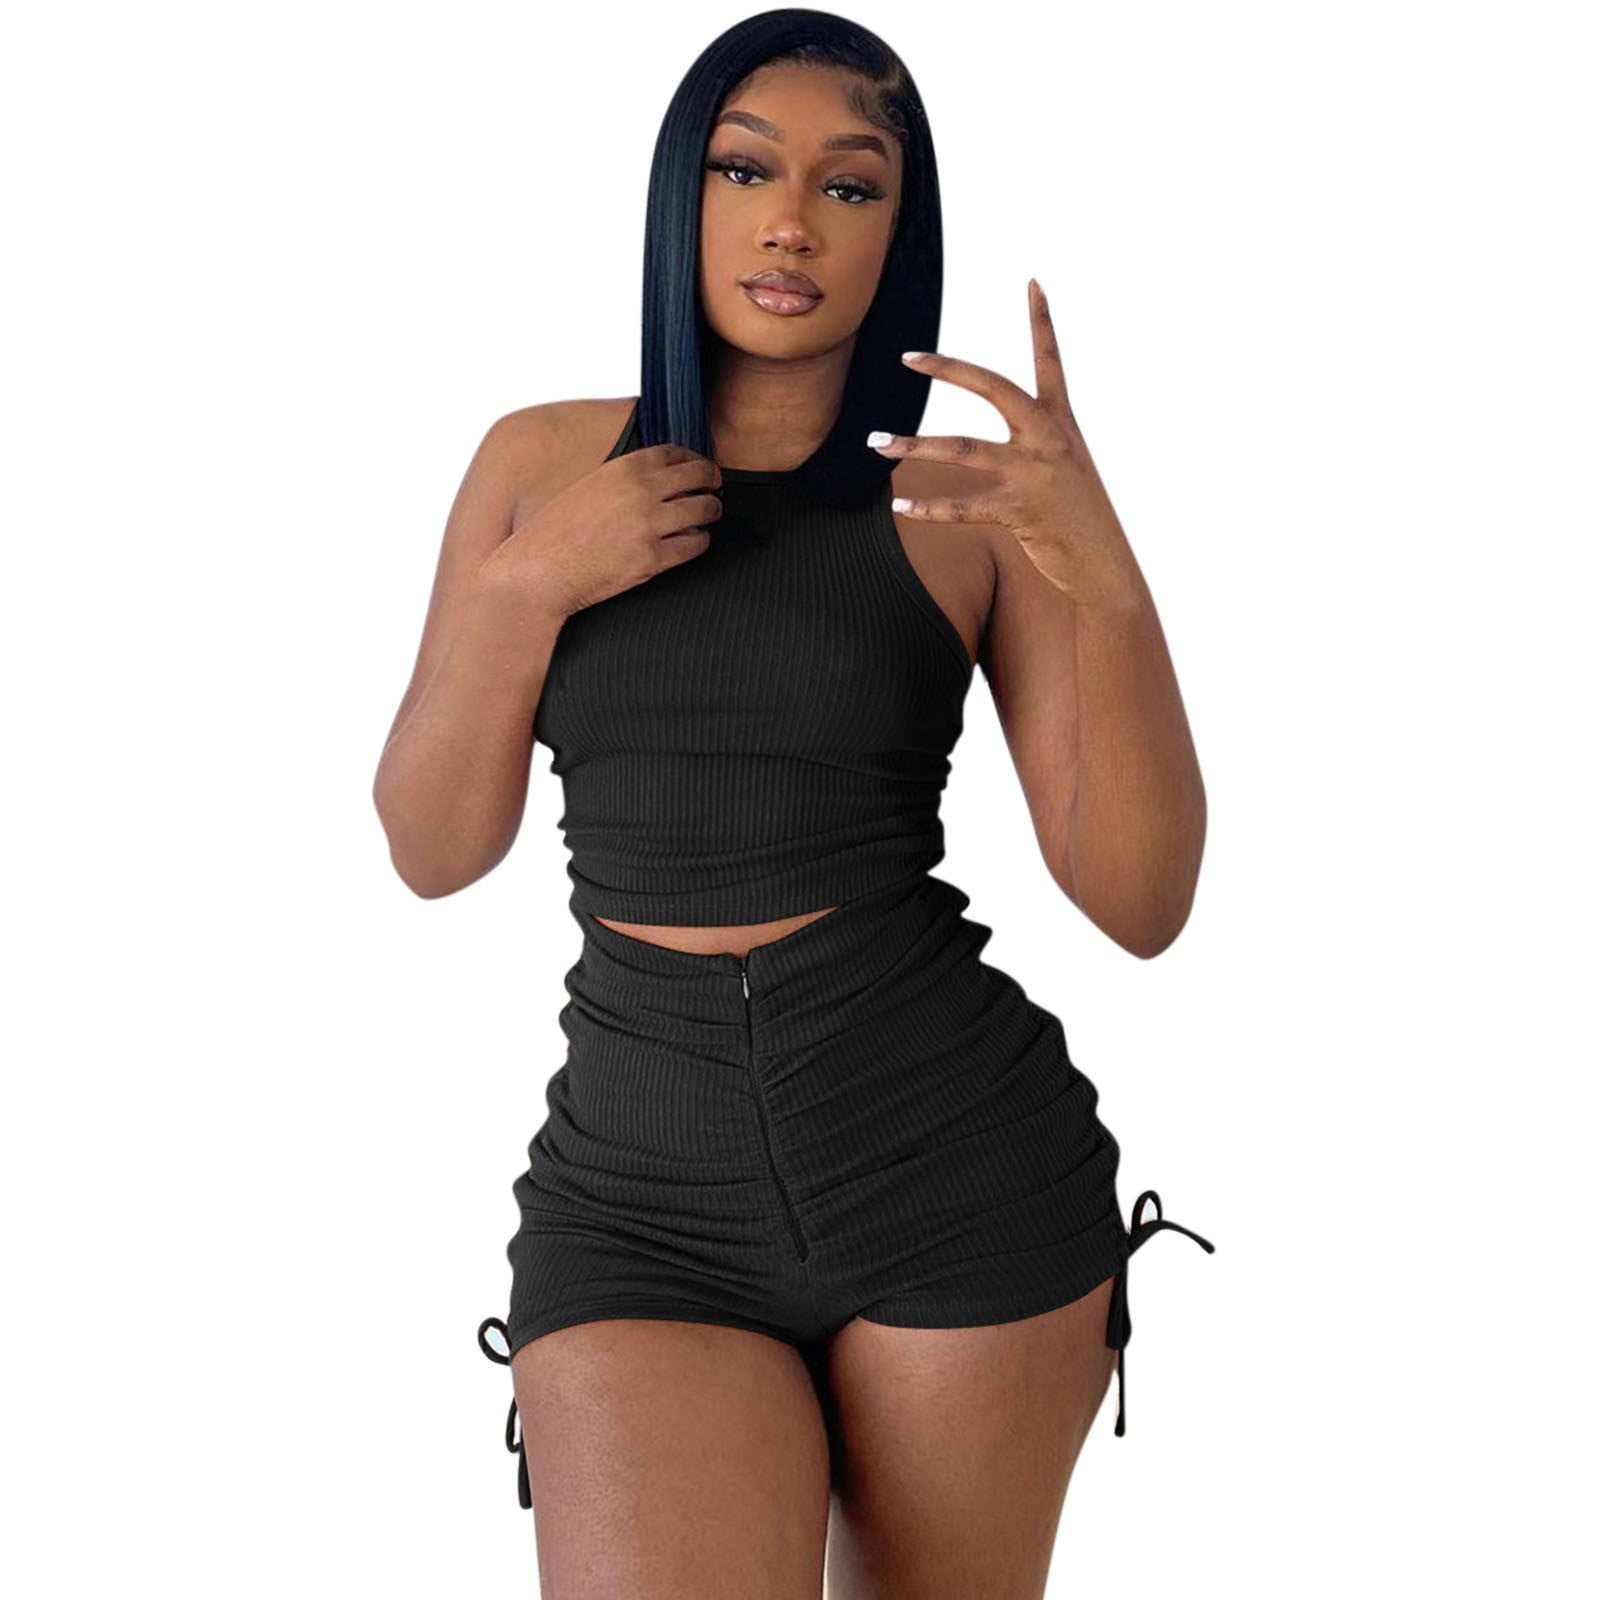 Women's Two Piece Ensemble with Bra-Style Crop Top and Short Shorts - Black